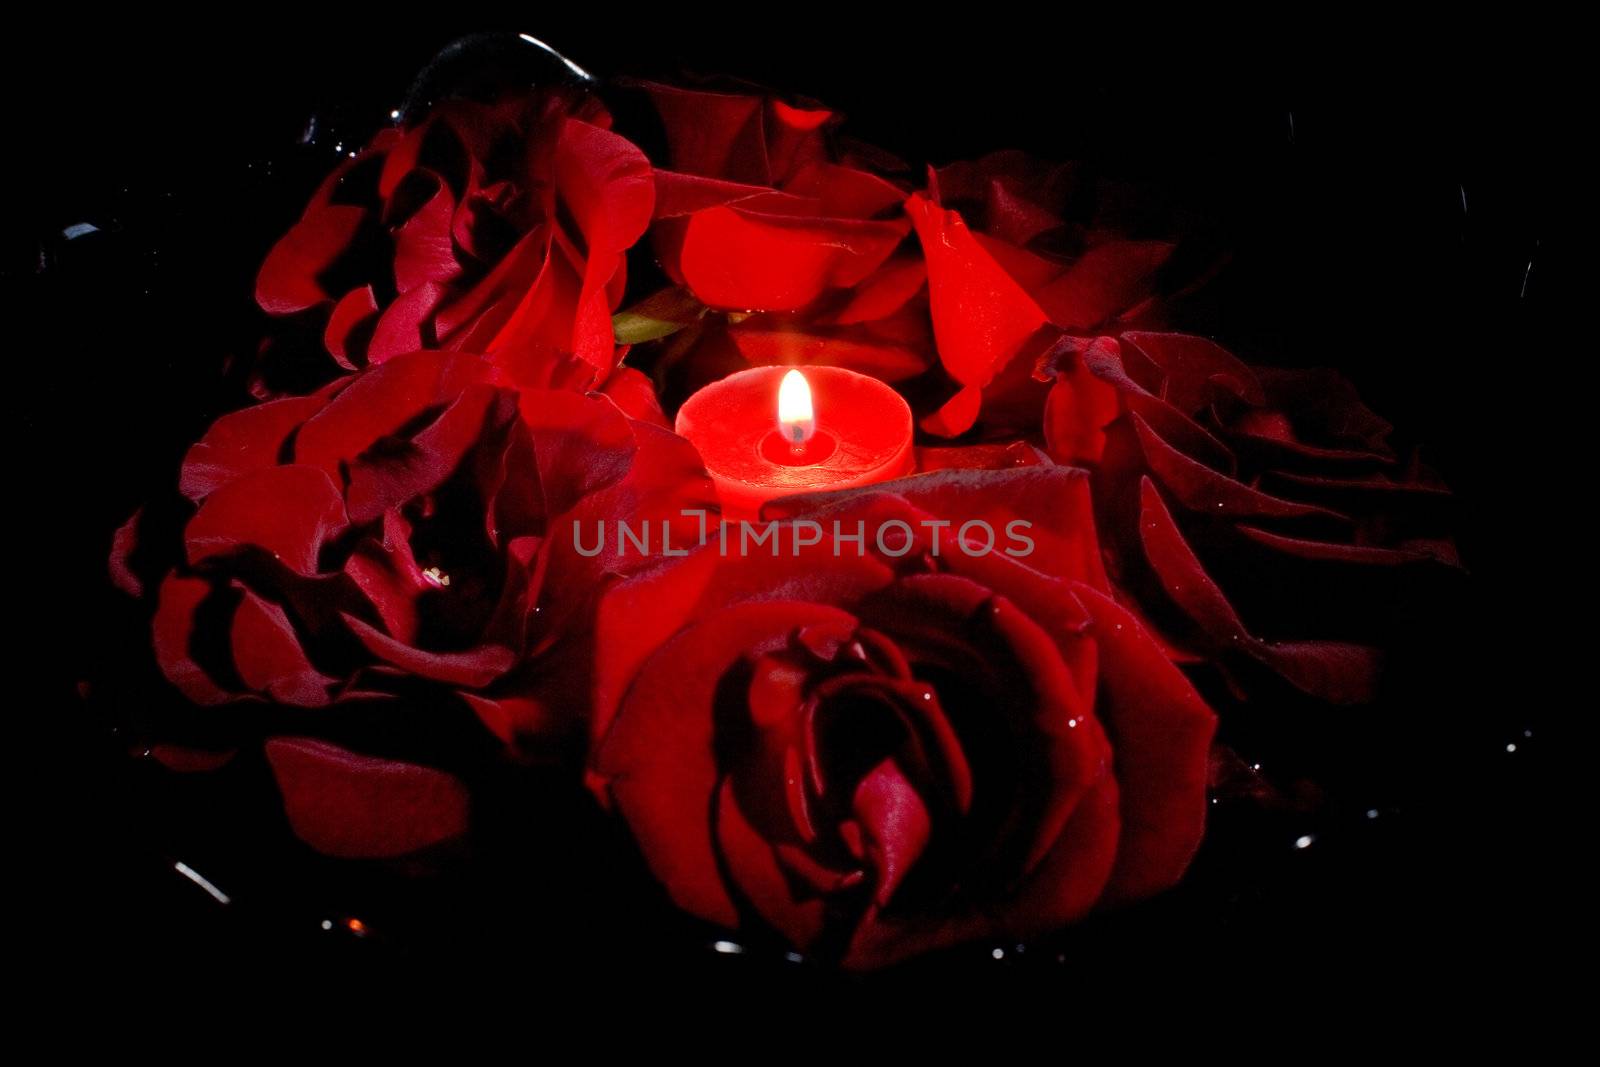 Red roses with candles on black